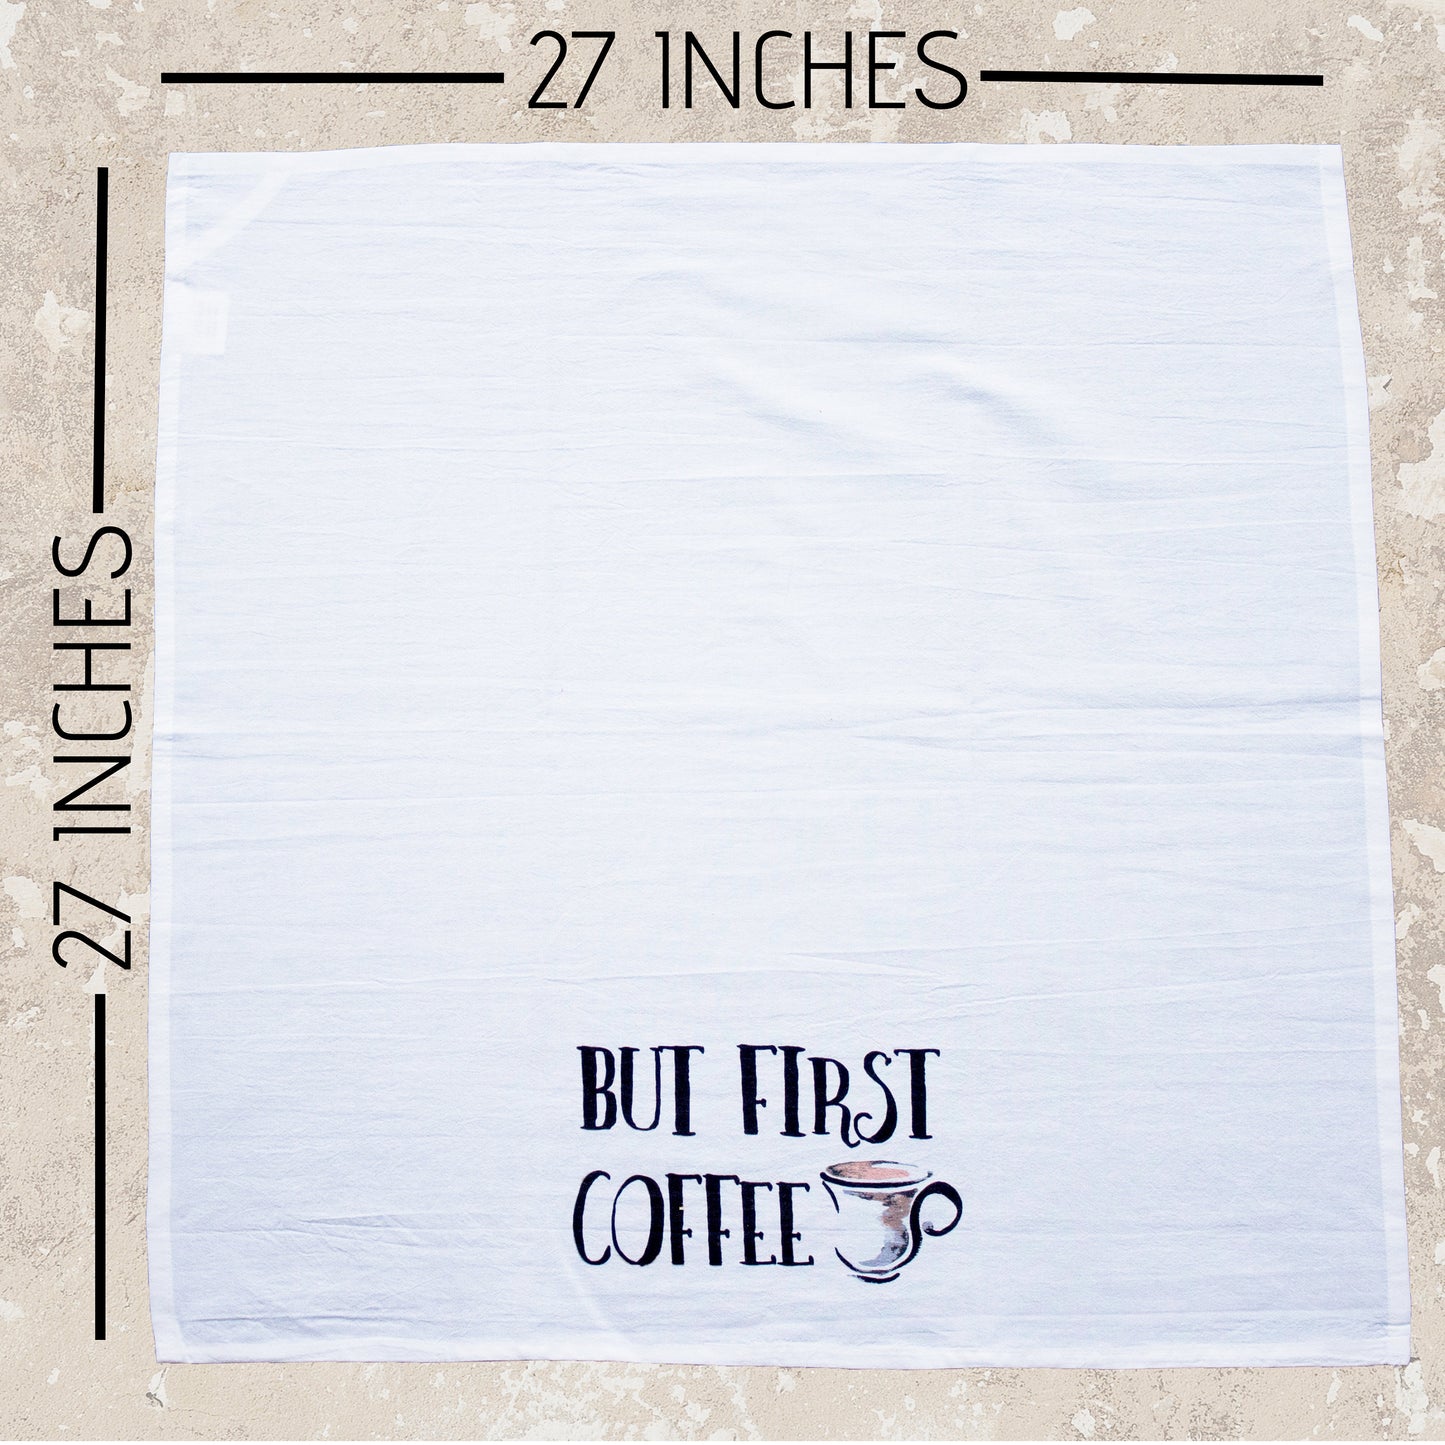 Set of two Easter Tea Towels - He is Risen and Be Still & Know